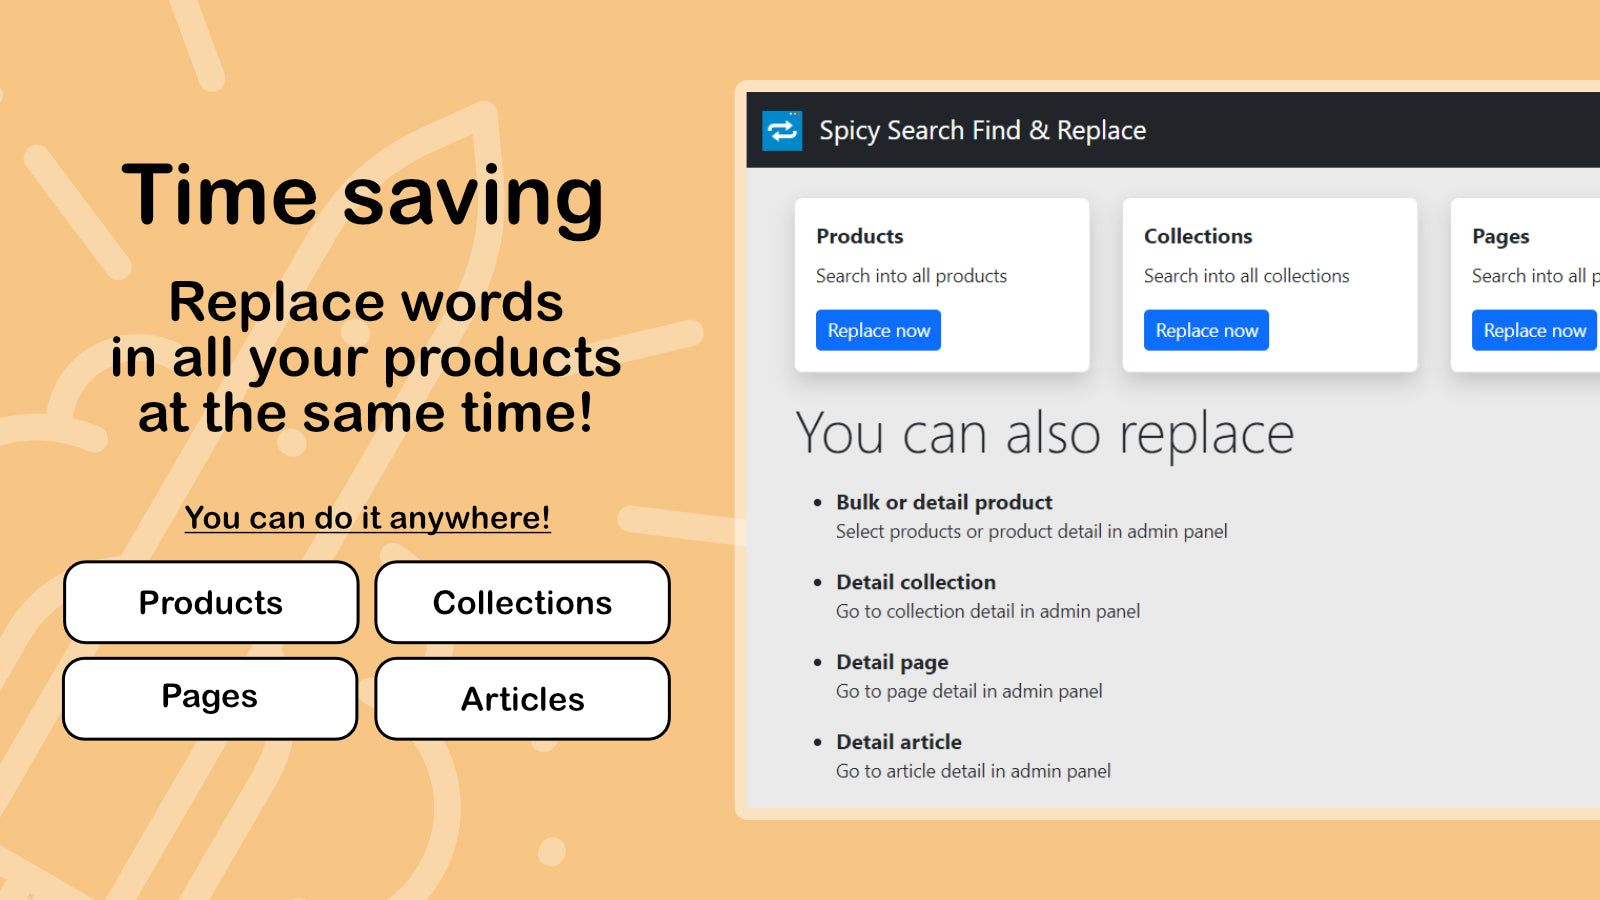 Save time by replacing words in all your products - Search